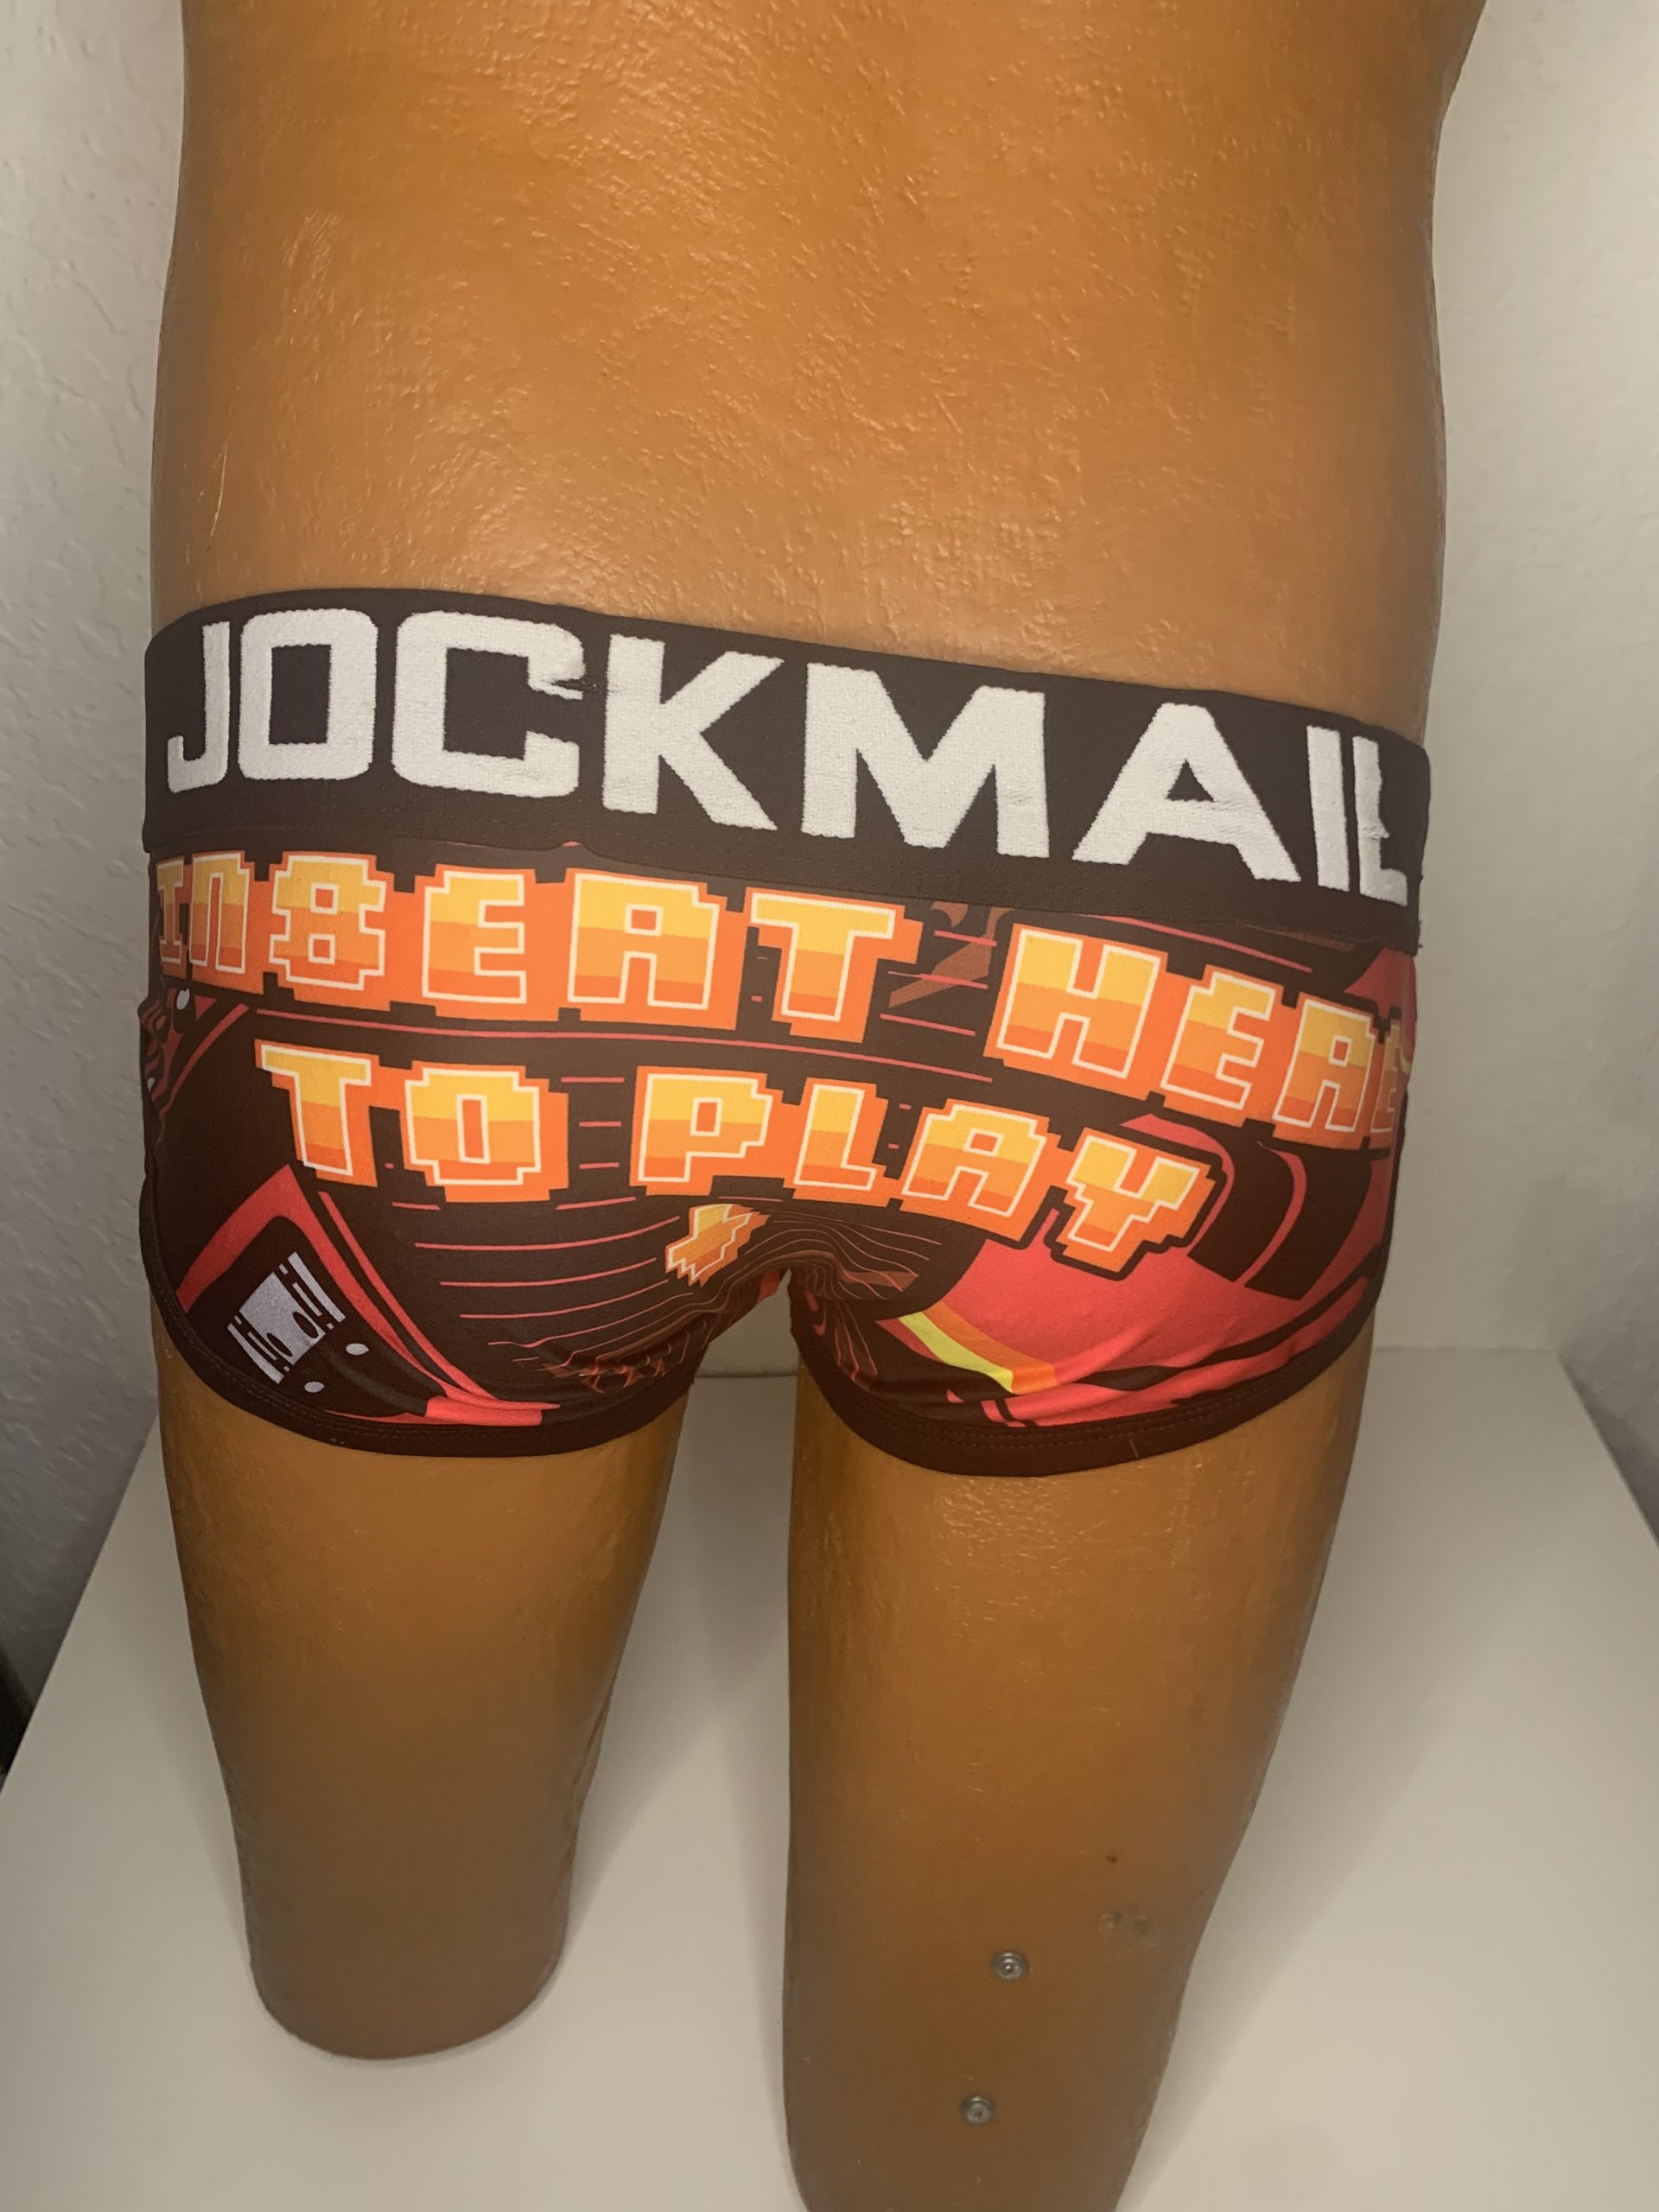 Jockmail Insert Here To Play Briefs